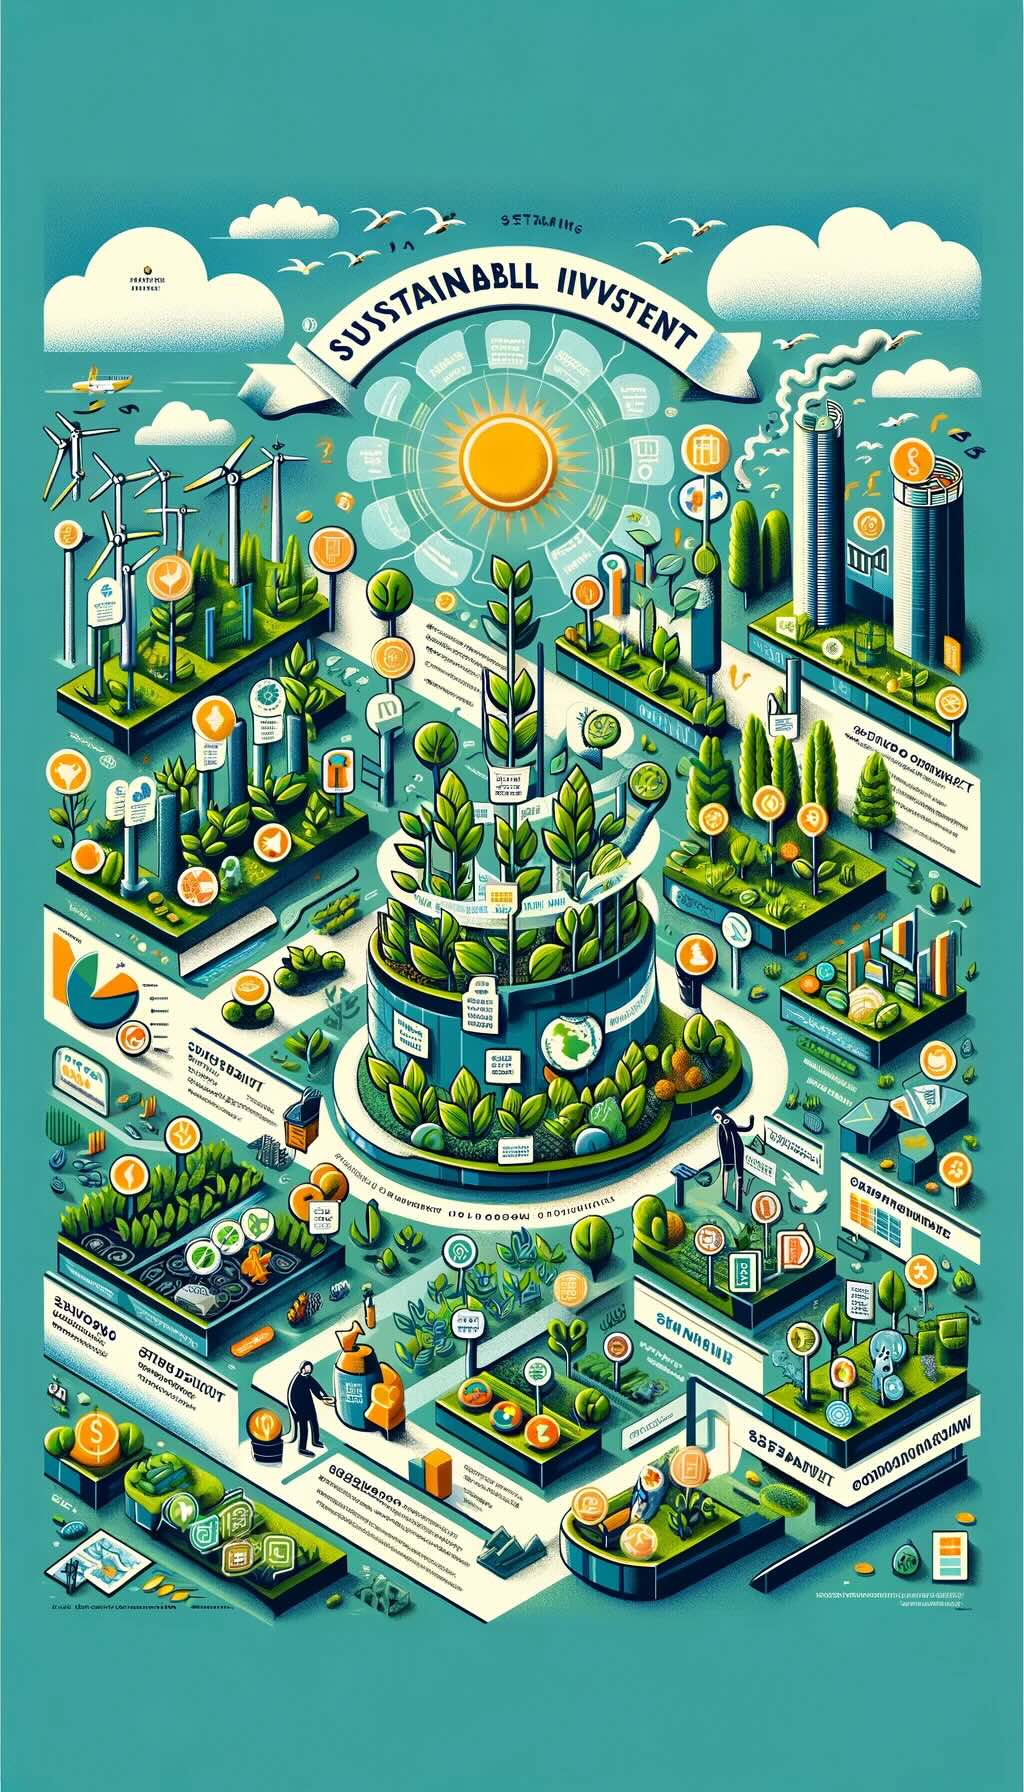 Concept of investing in sustainable funds, depicting a vibrant garden where each plant symbolizes a different aspect of sustainable investment, such as renewable energy, social responsibility, and corporate governance. An investor at the garden's heart nurtures these values with a watering can marked 'Sustainable Growth', highlighting the dual benefits of fostering portfolio growth and contributing positively to the planet. The garden is adorned with symbols of clean energy, healthy communities, and ethical corporate practices, encircled by pathways leading to various investment opportunities. This visual narrative invites viewers to consider how sustainable funds allow for financial returns while supporting environmental protection, social equity, and good governance, encouraging a thoughtful alignment of personal values with investment choices. 